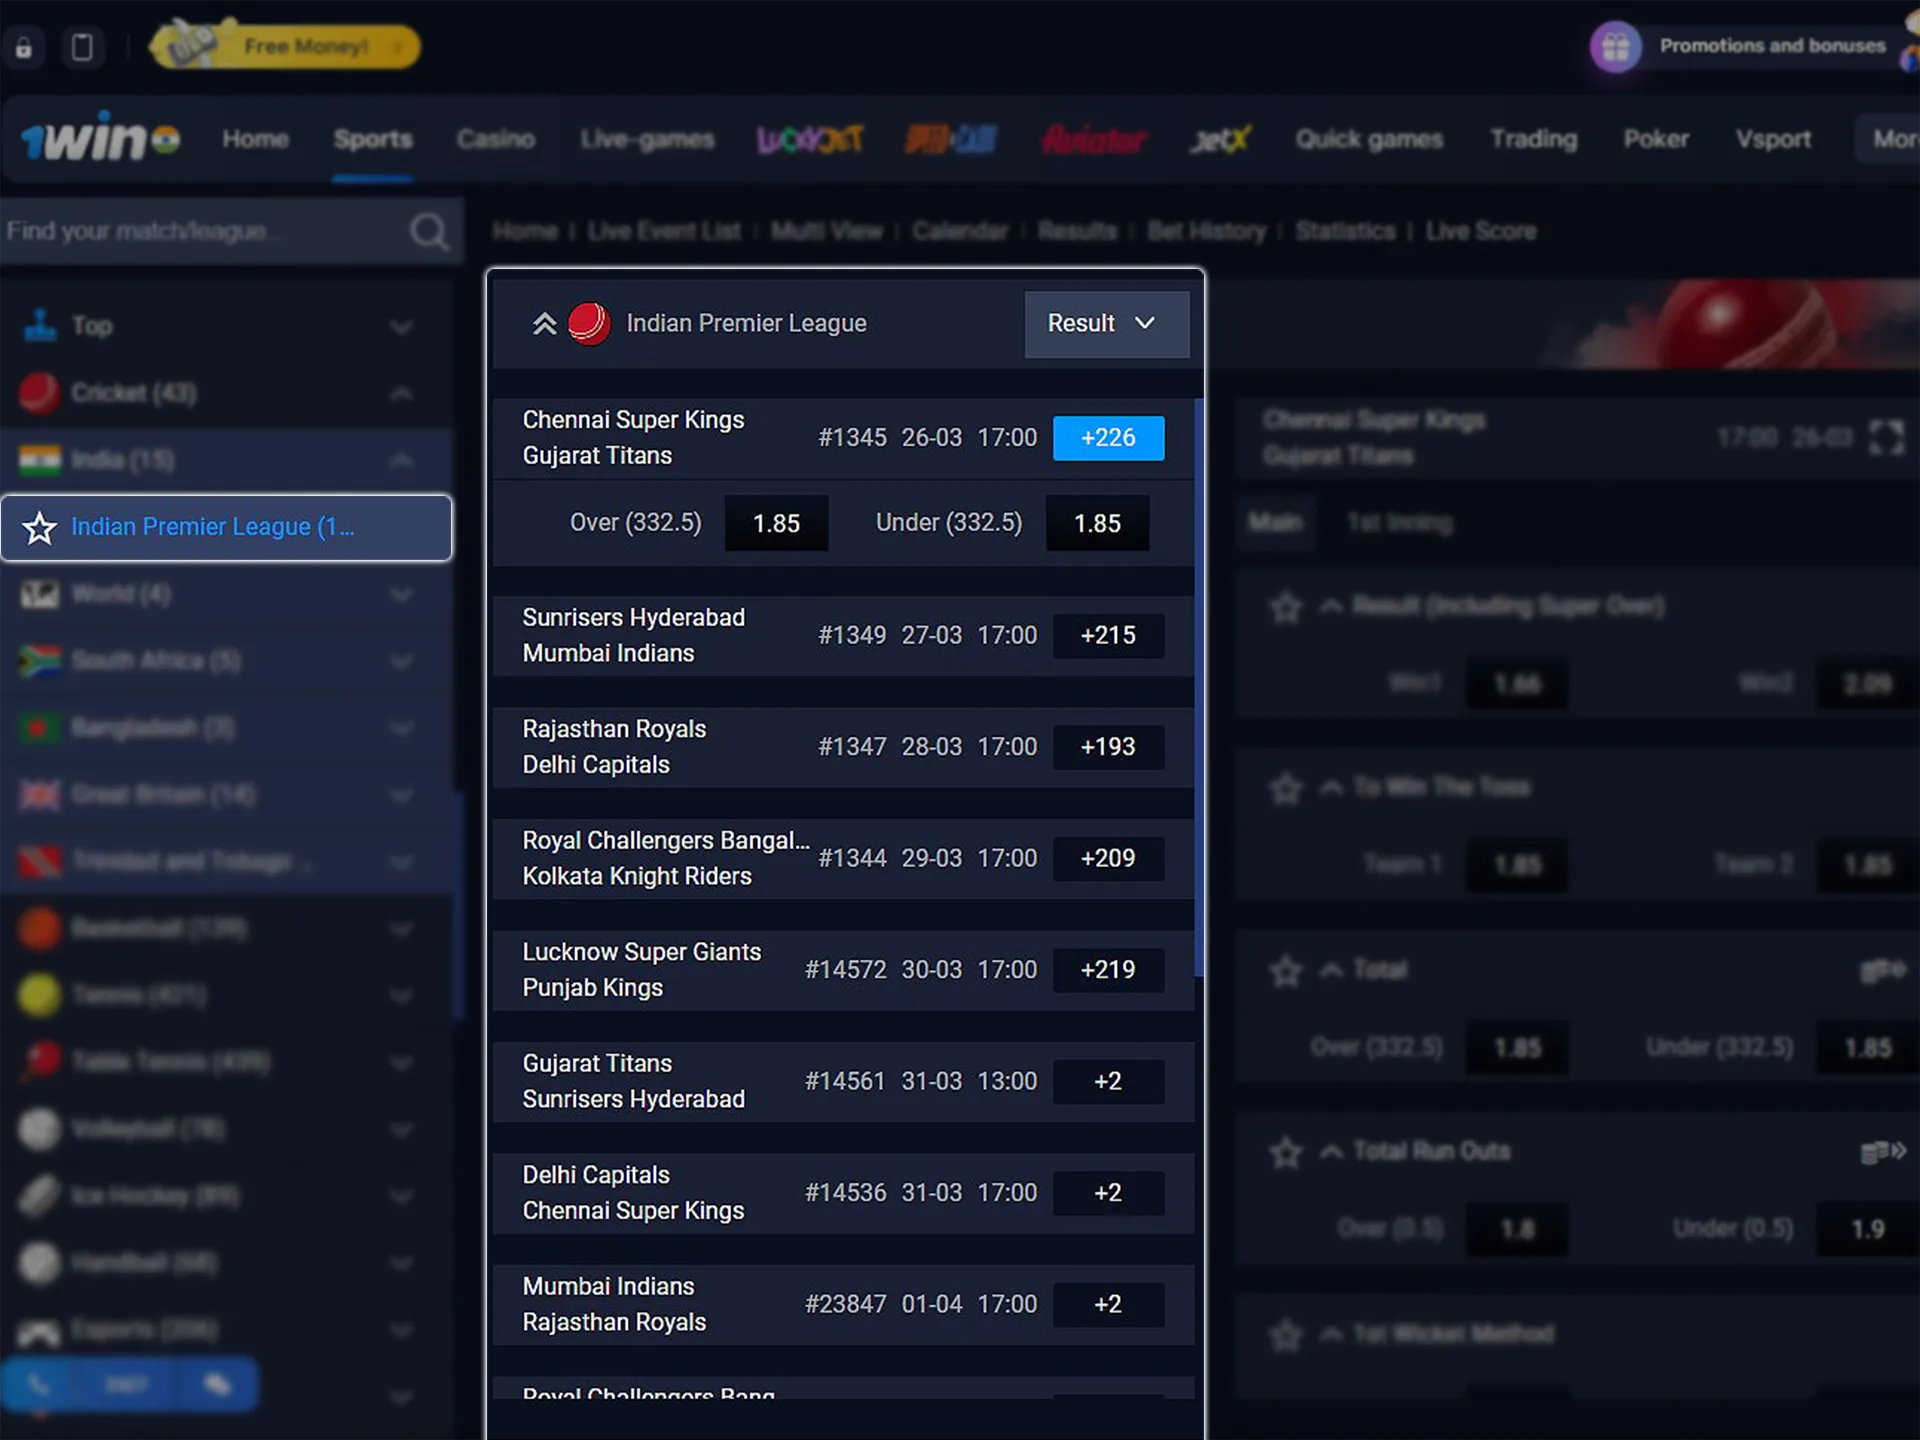 Go to the IPL betting section at 1win and select the match you are interested in.